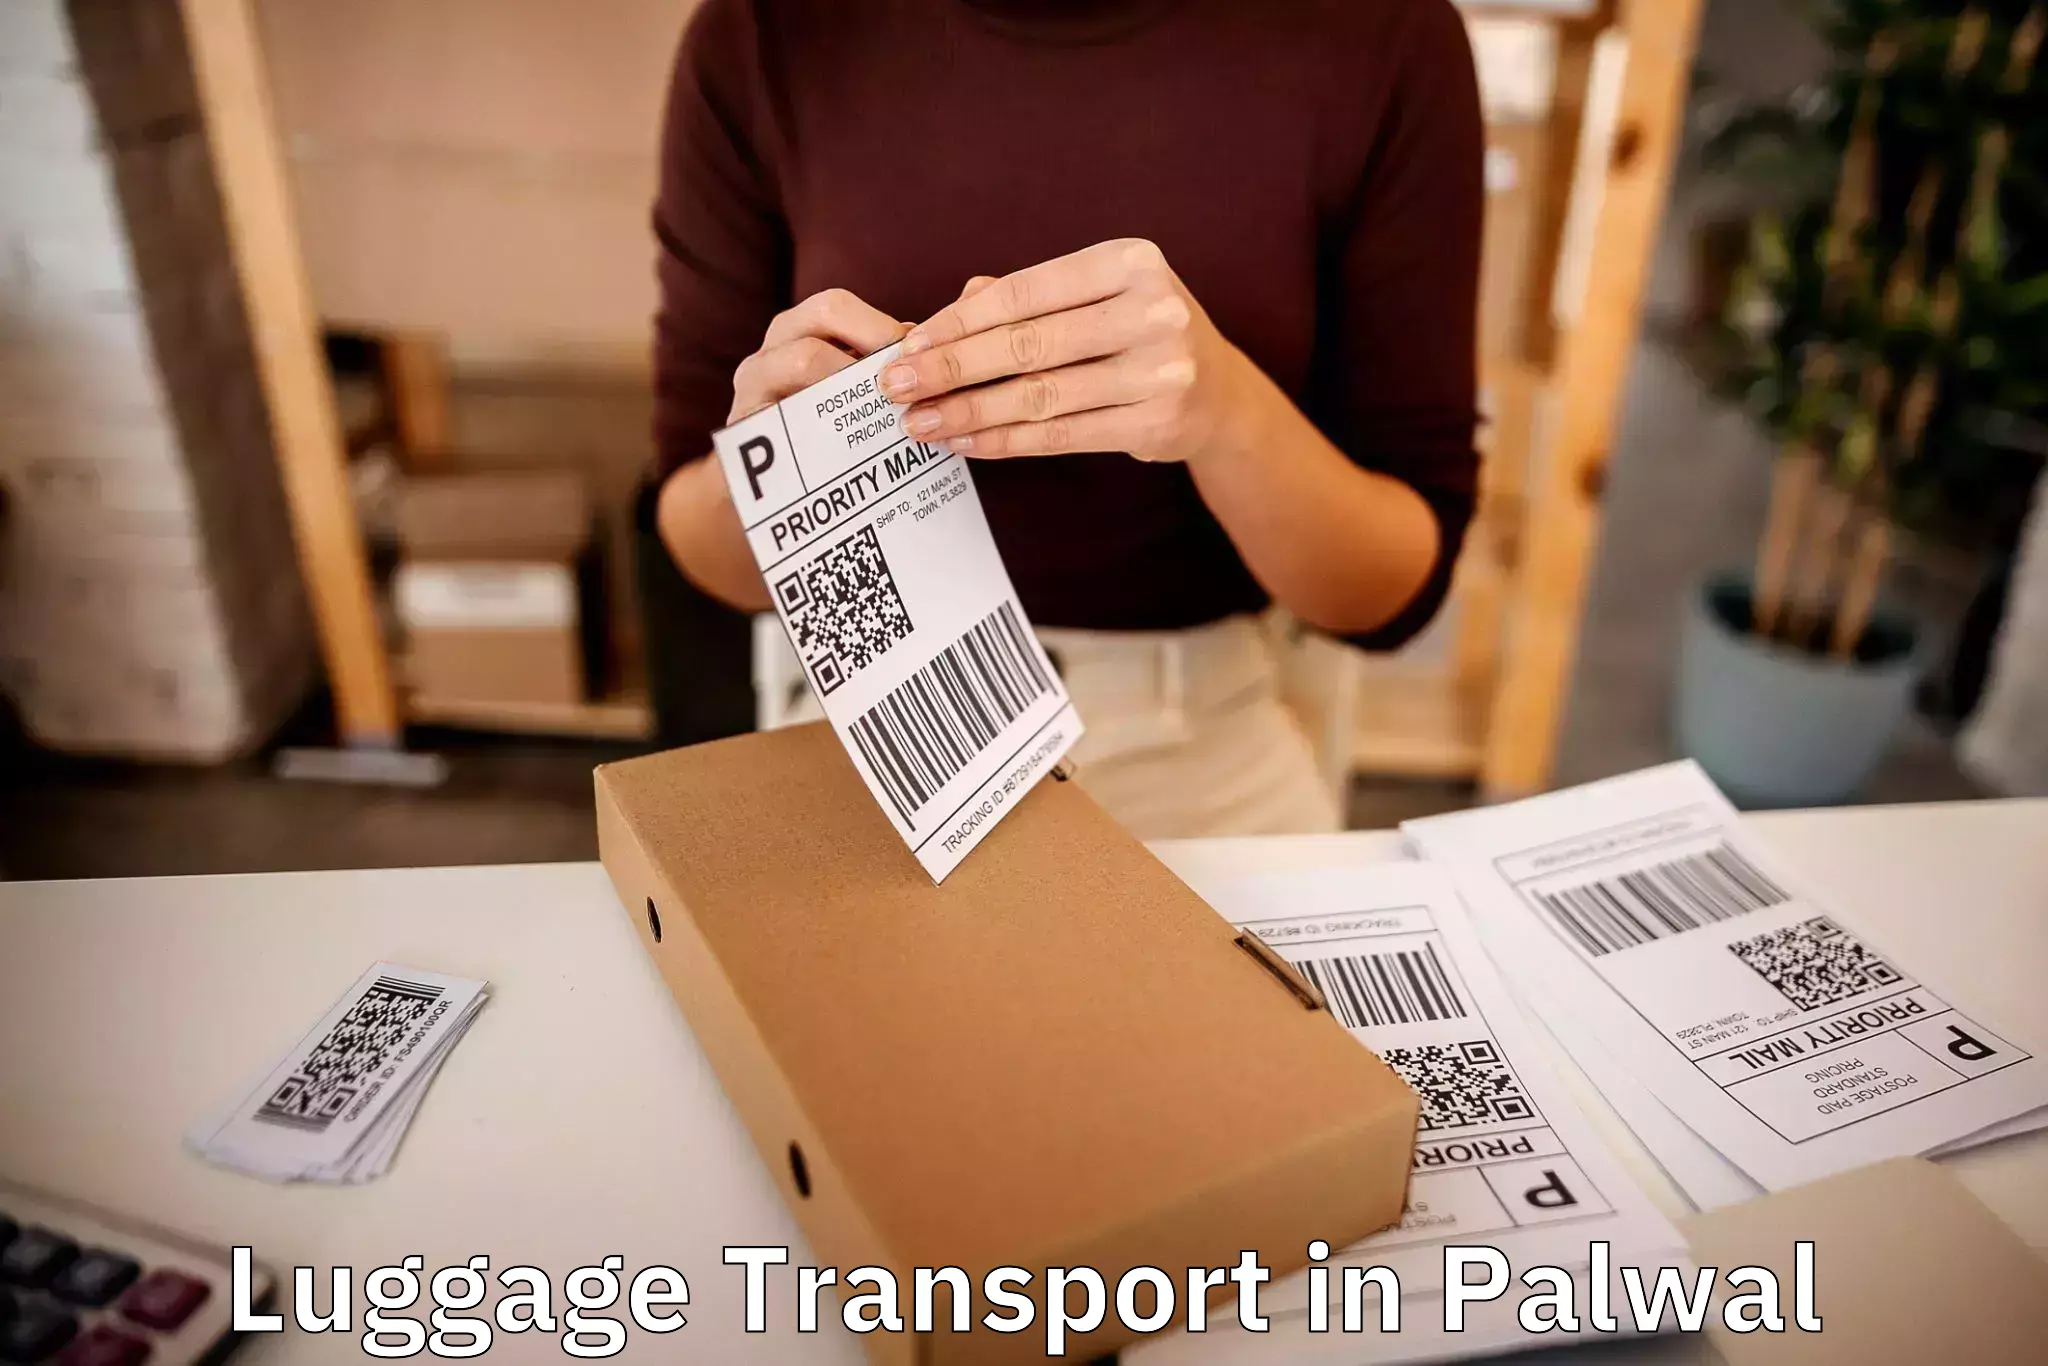 Baggage transport coordination in Palwal